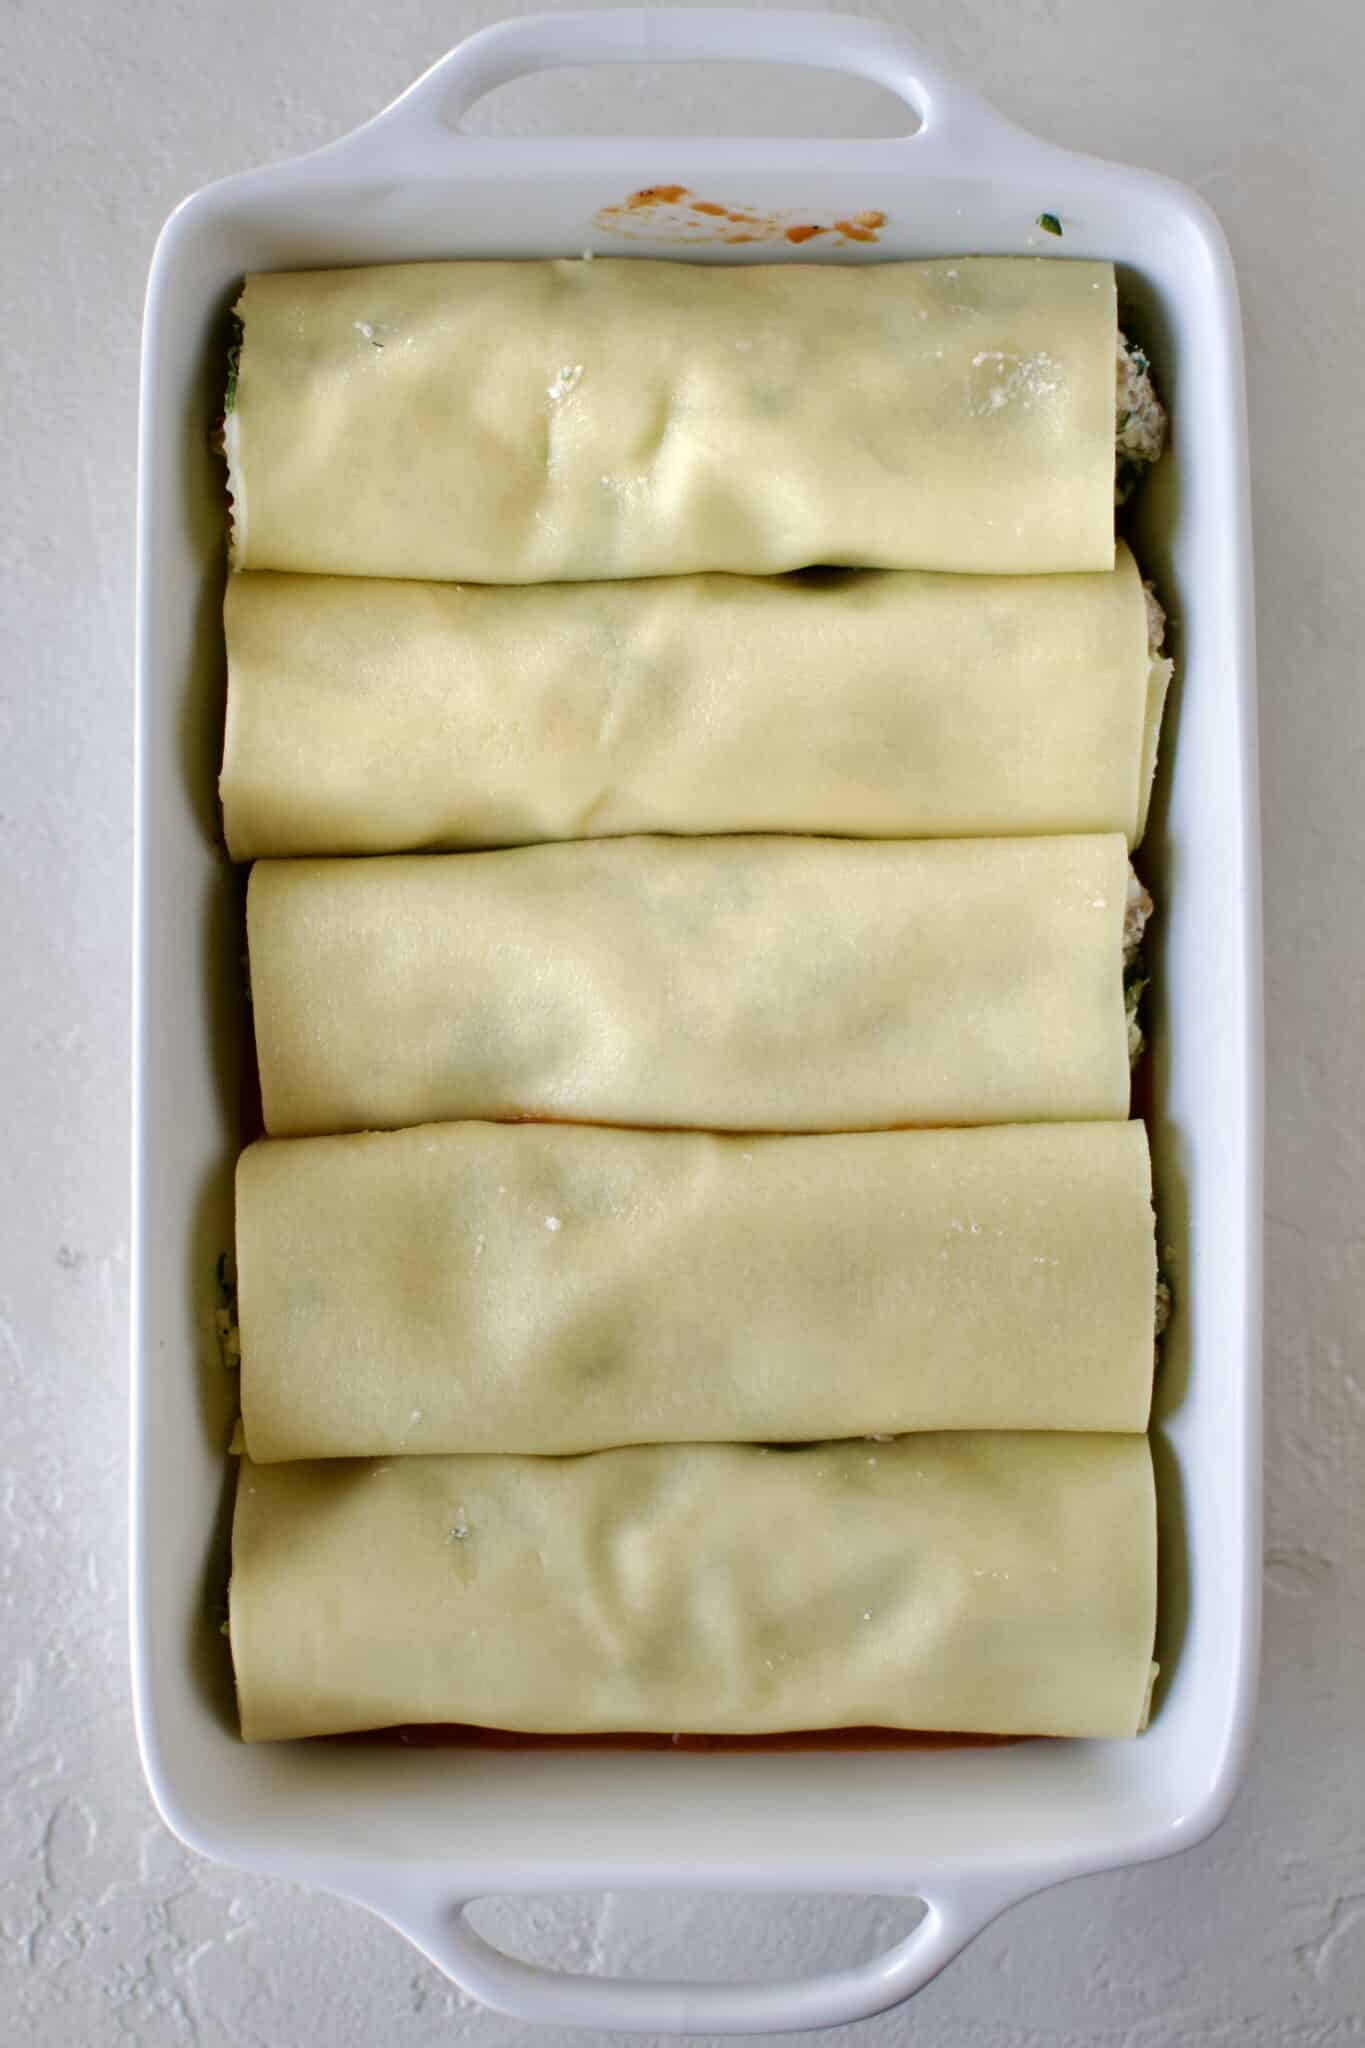 Full dish of manicotti ready to be topped with red sauce and cheese.